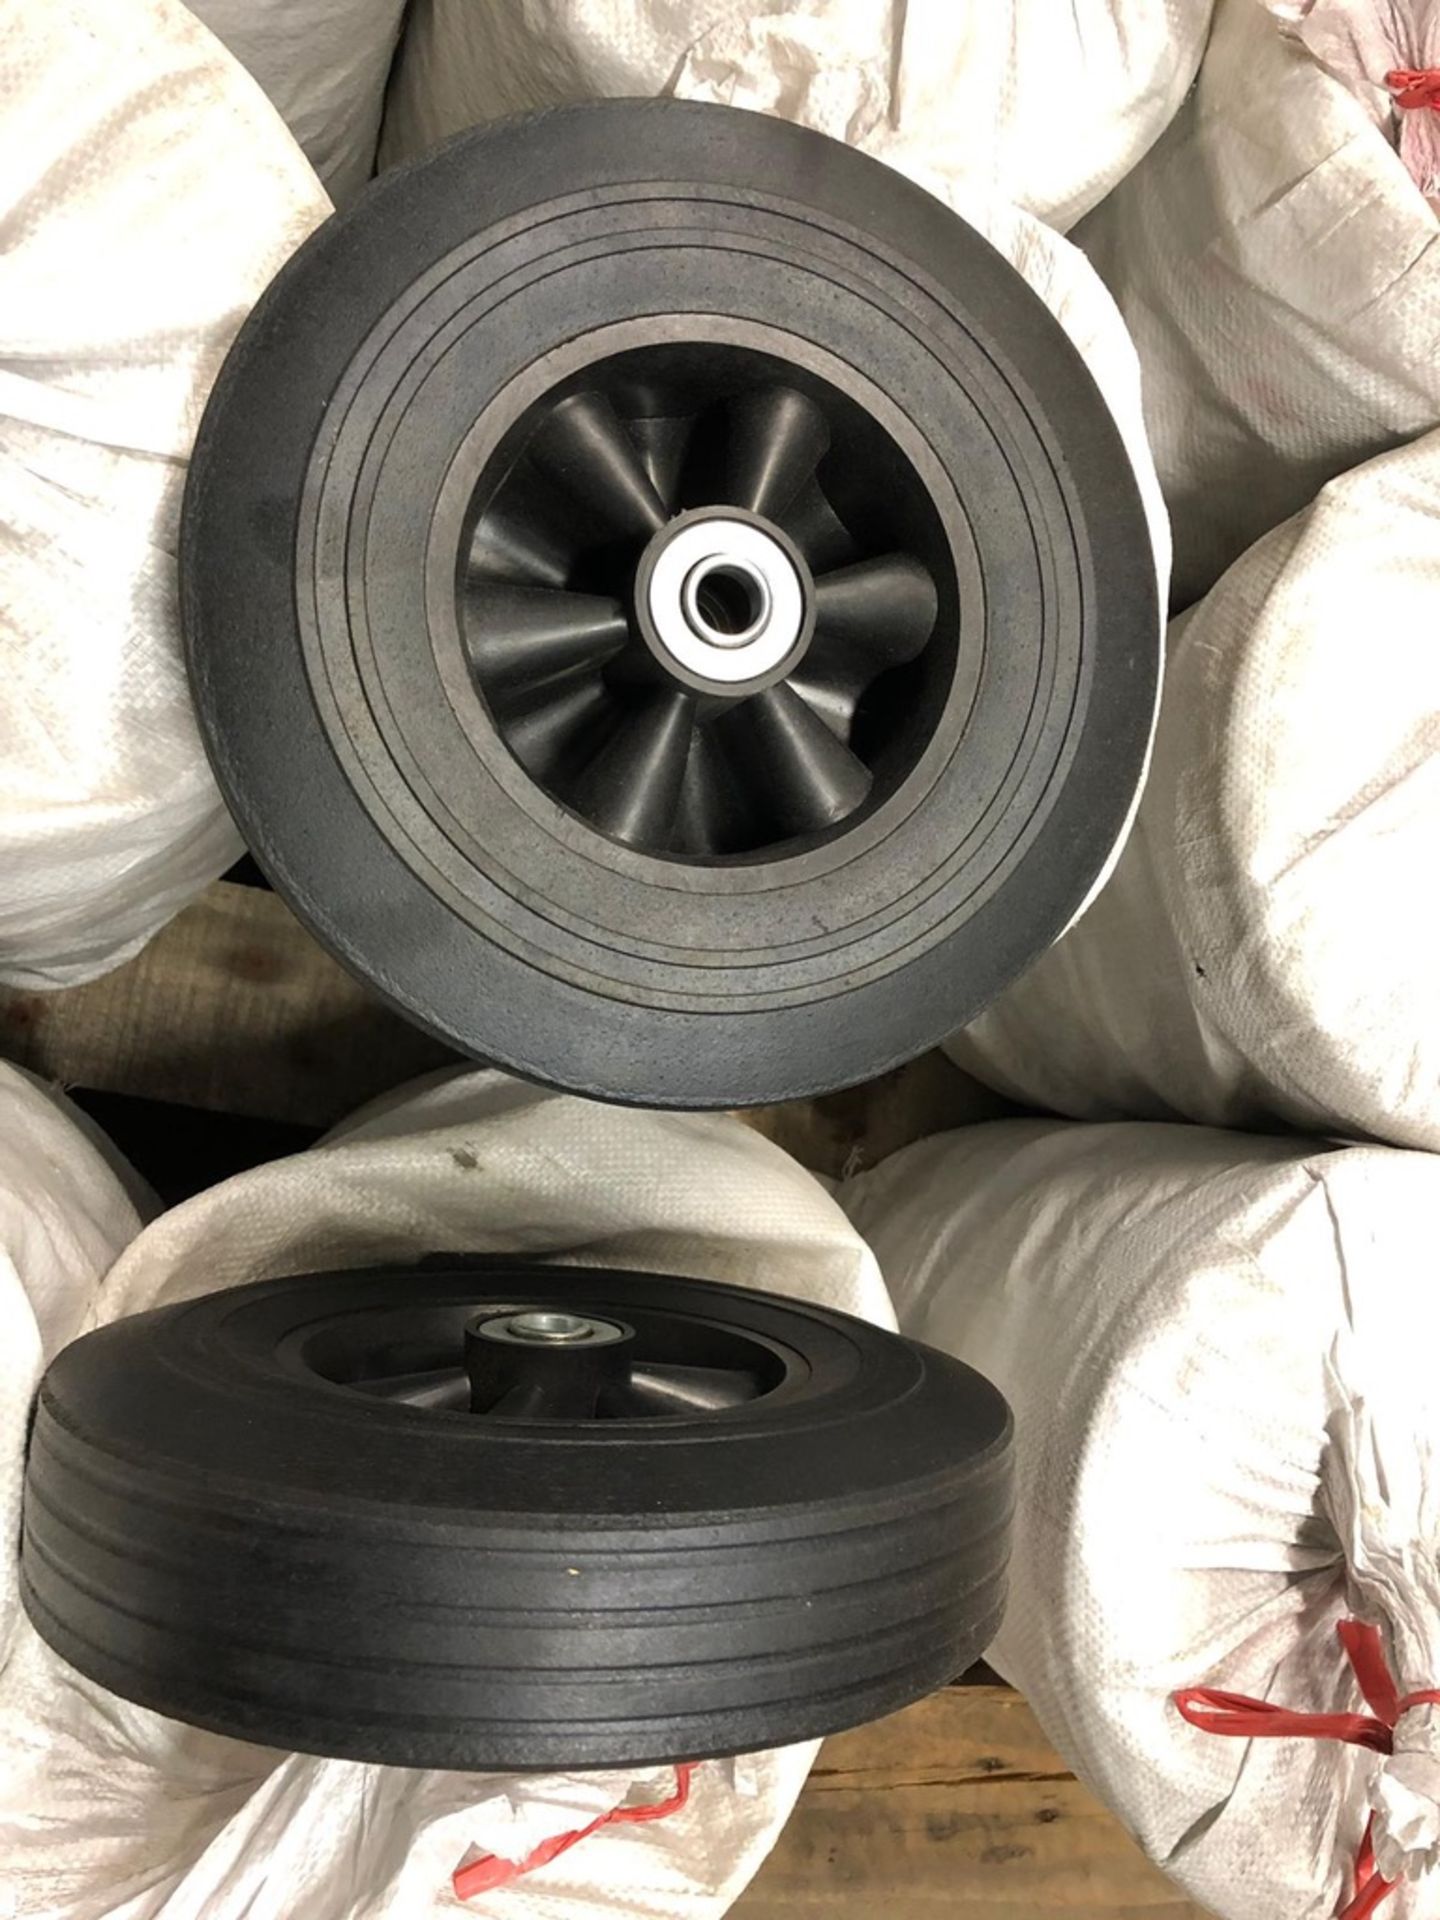 5 x pairs of replacement solid rubber wheels for sack barrows and chair trolleys